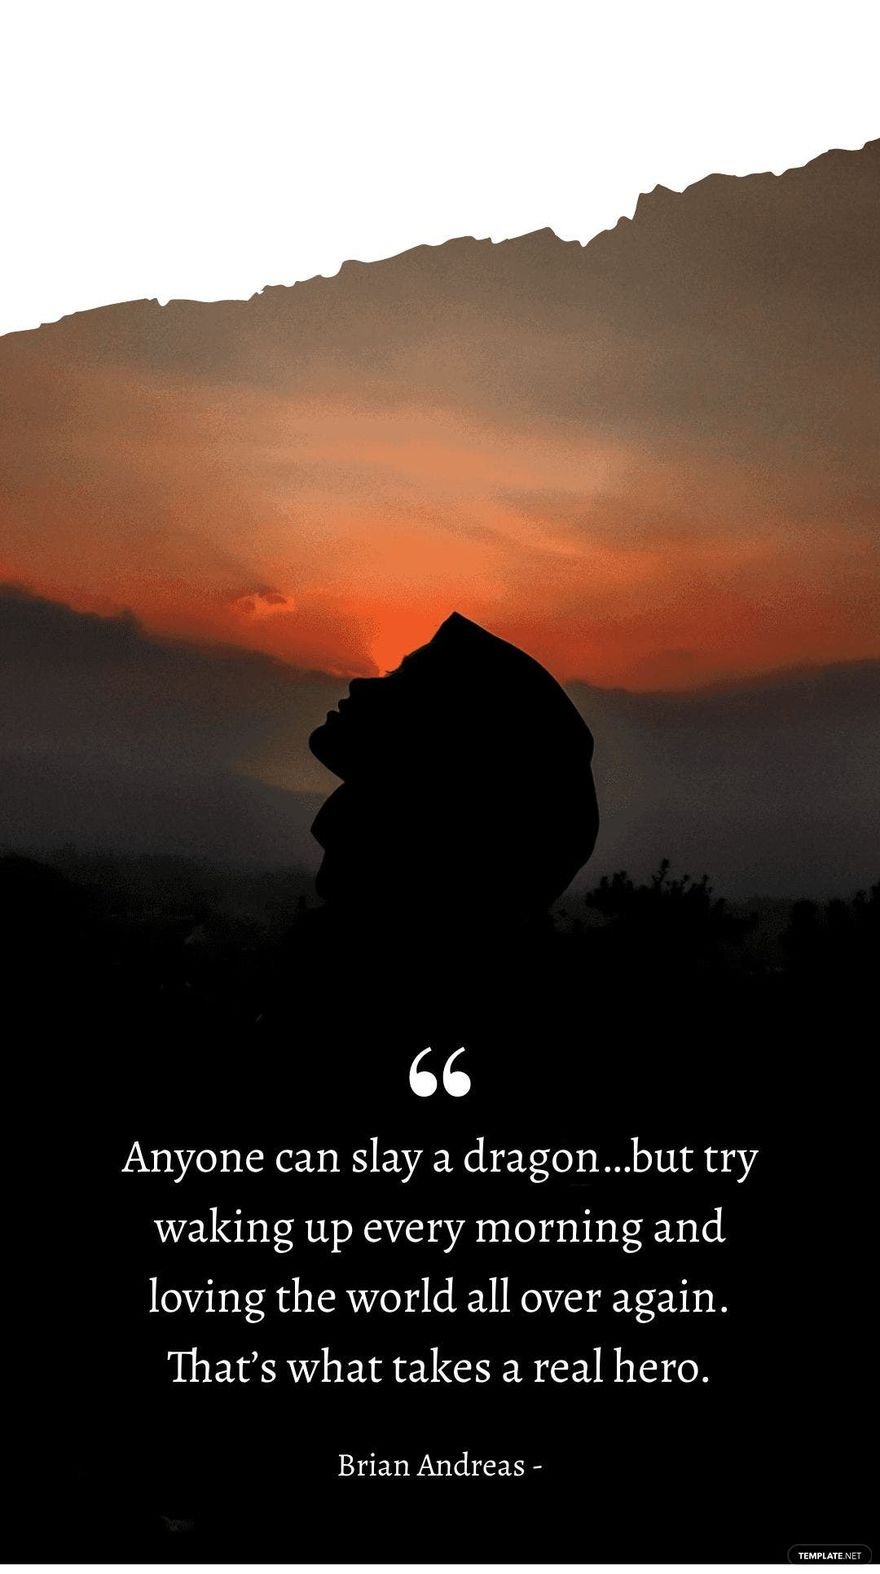 Brian Andreas - Anyone can slay a dragon…but try waking up every morning and loving the world all over again. That’s what takes a real hero.